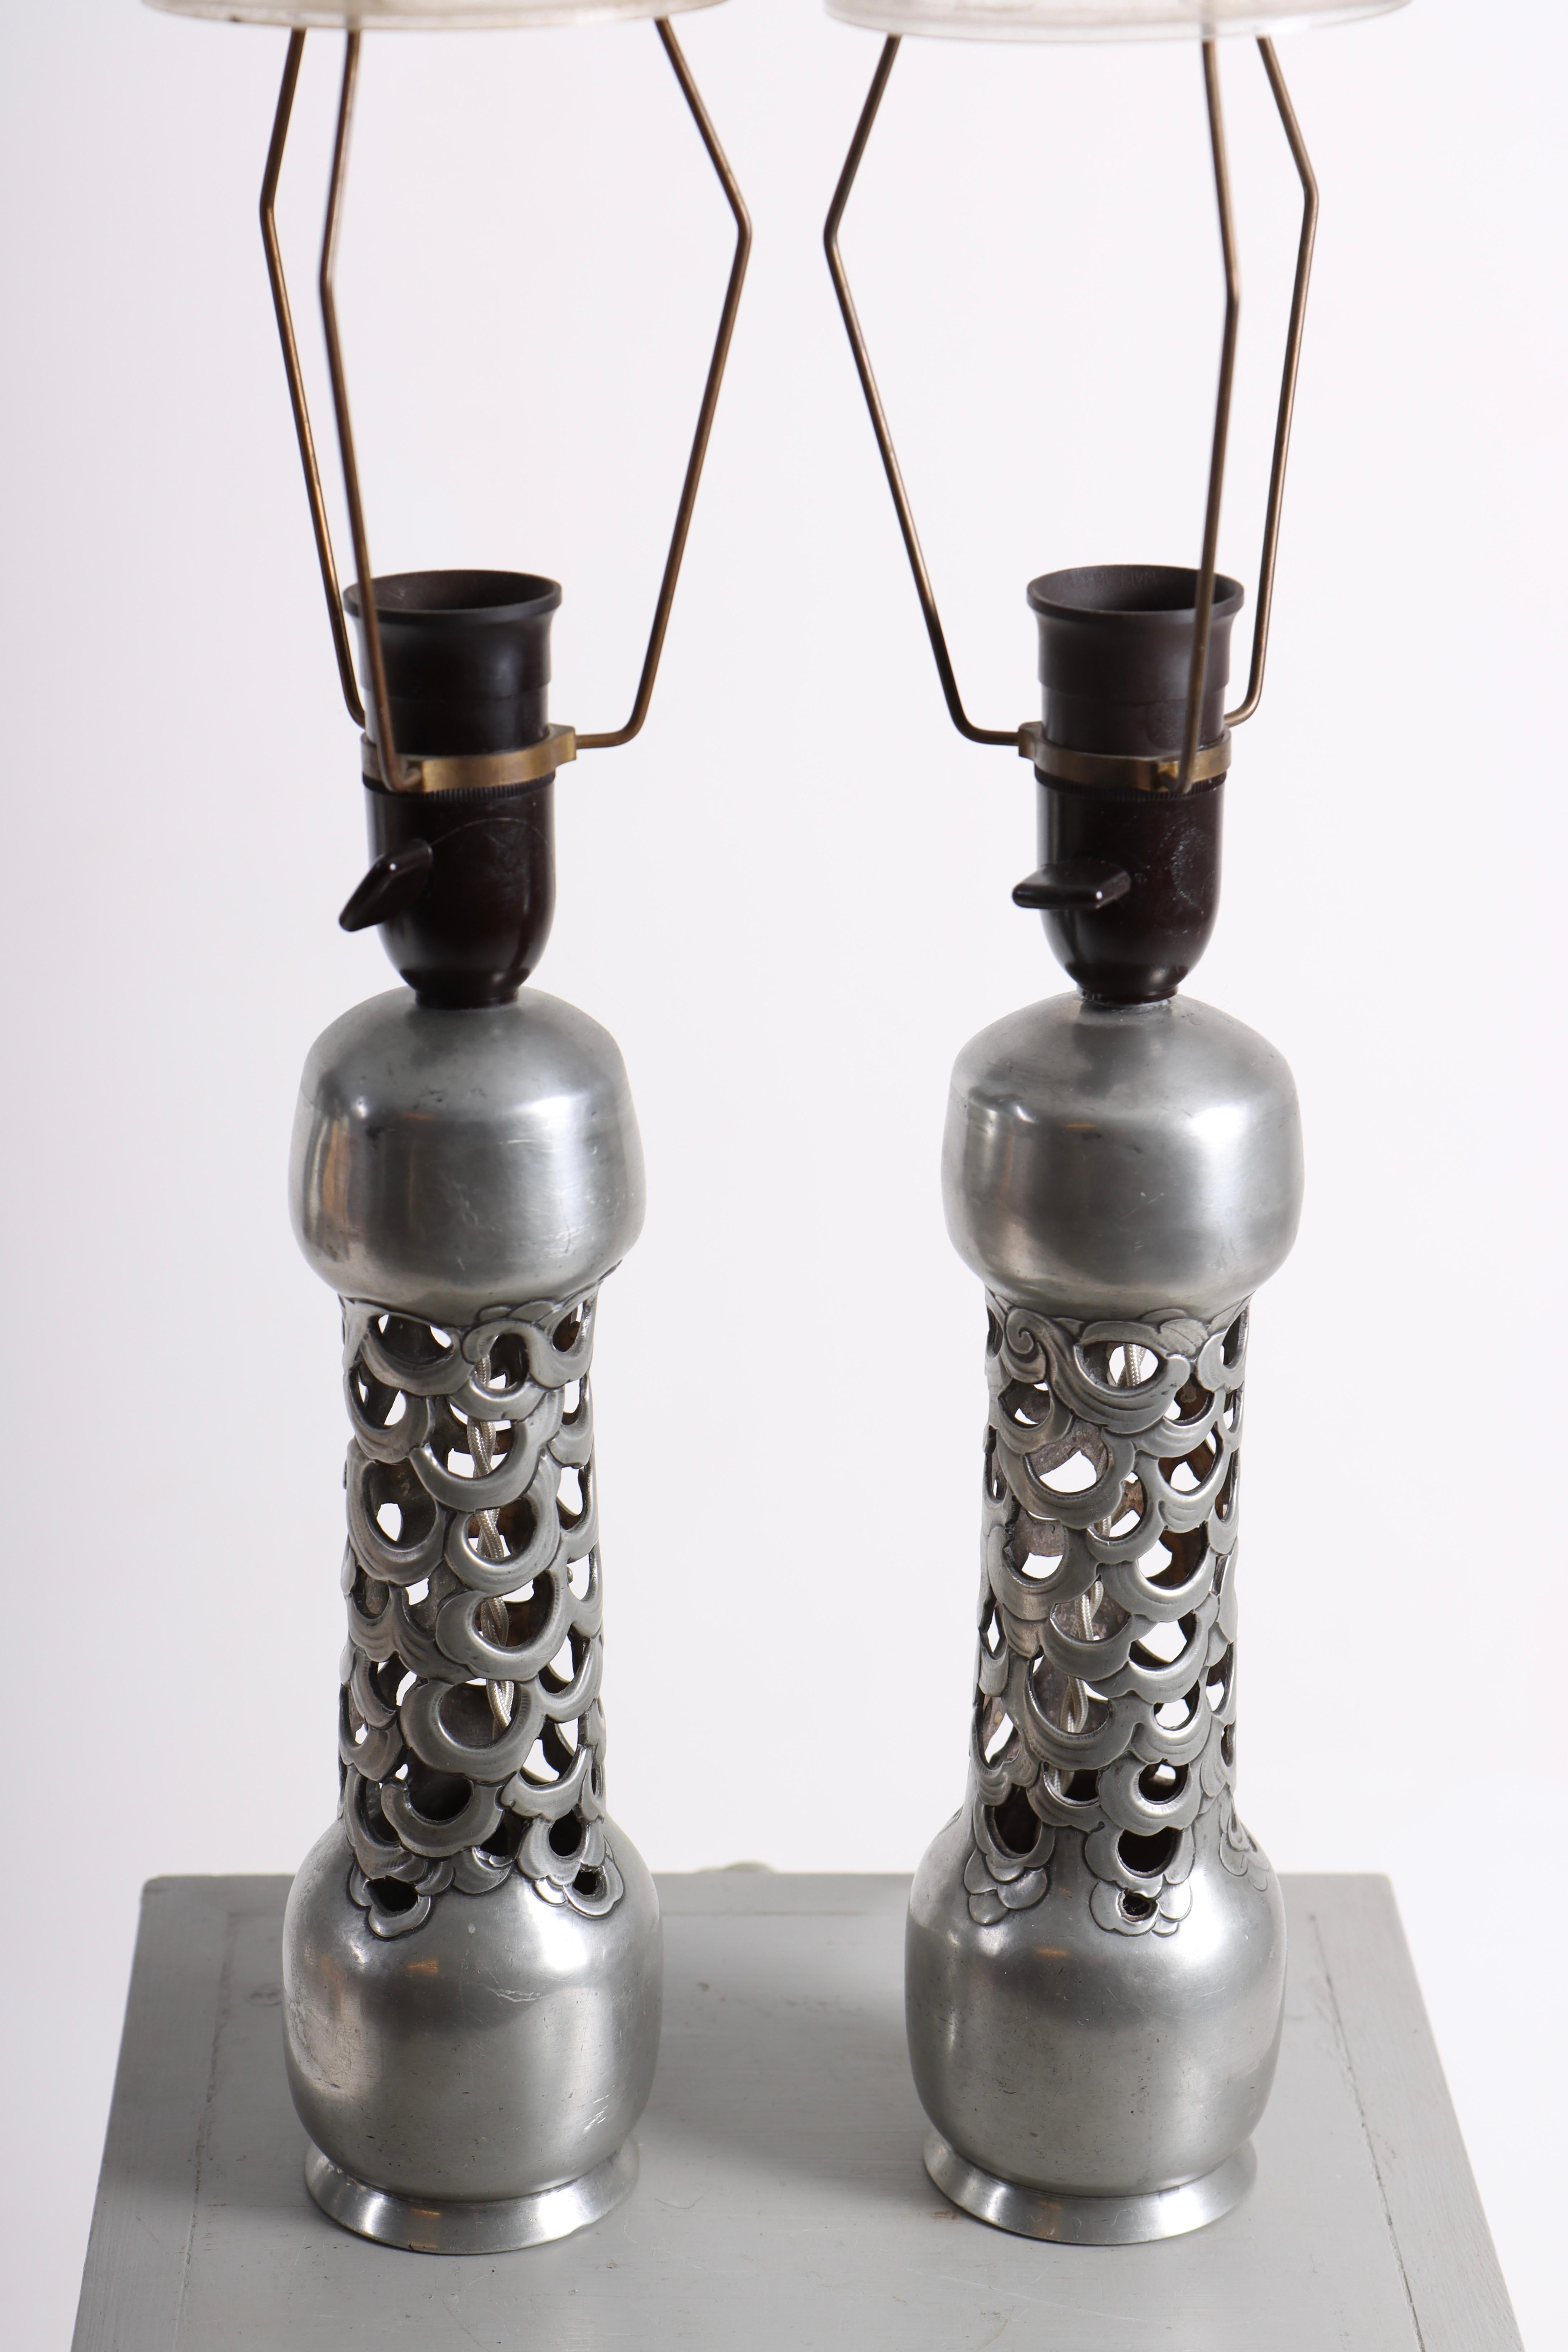 Danish Pair of Patinated Tin Table Lamps by Mogens Ballin, 1930s